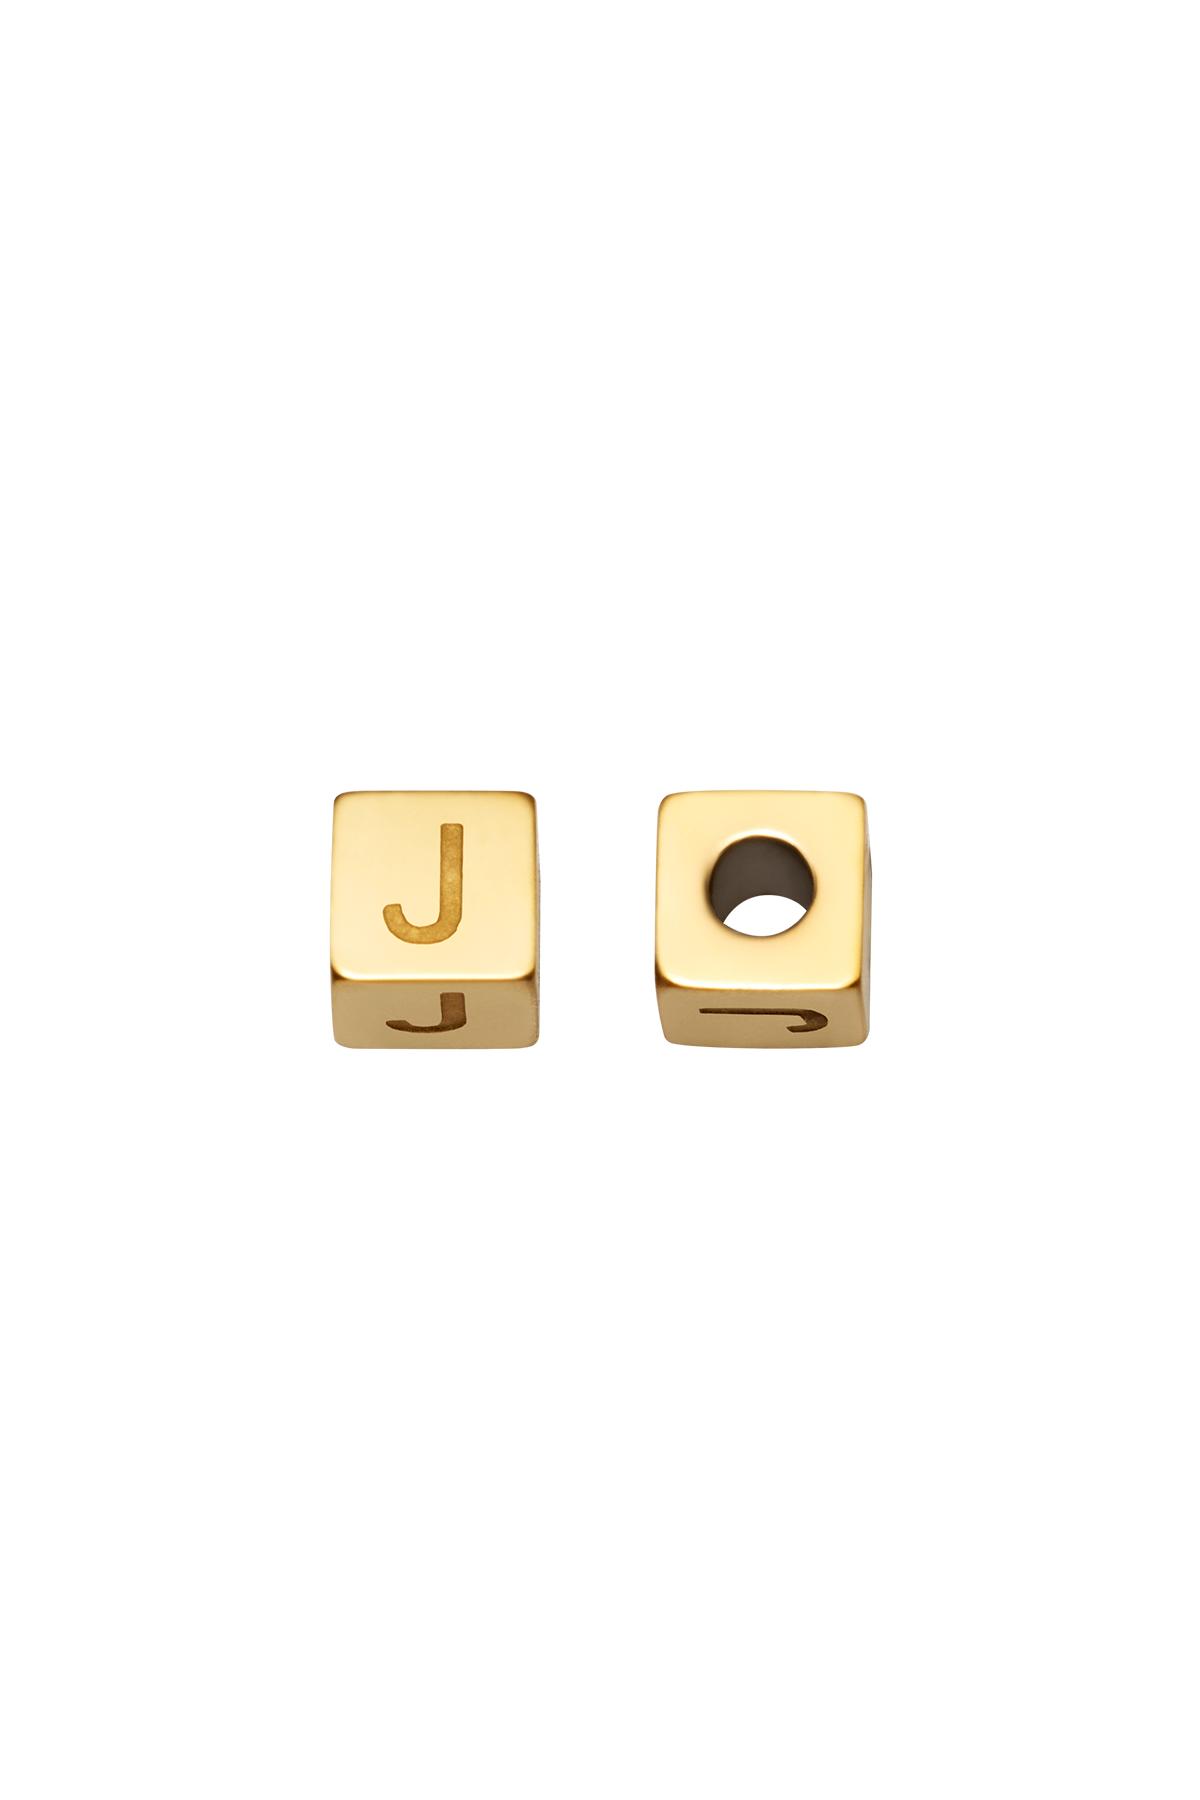 Gold / DIY Beads Alphabet Gold J Stainless Steel Picture21